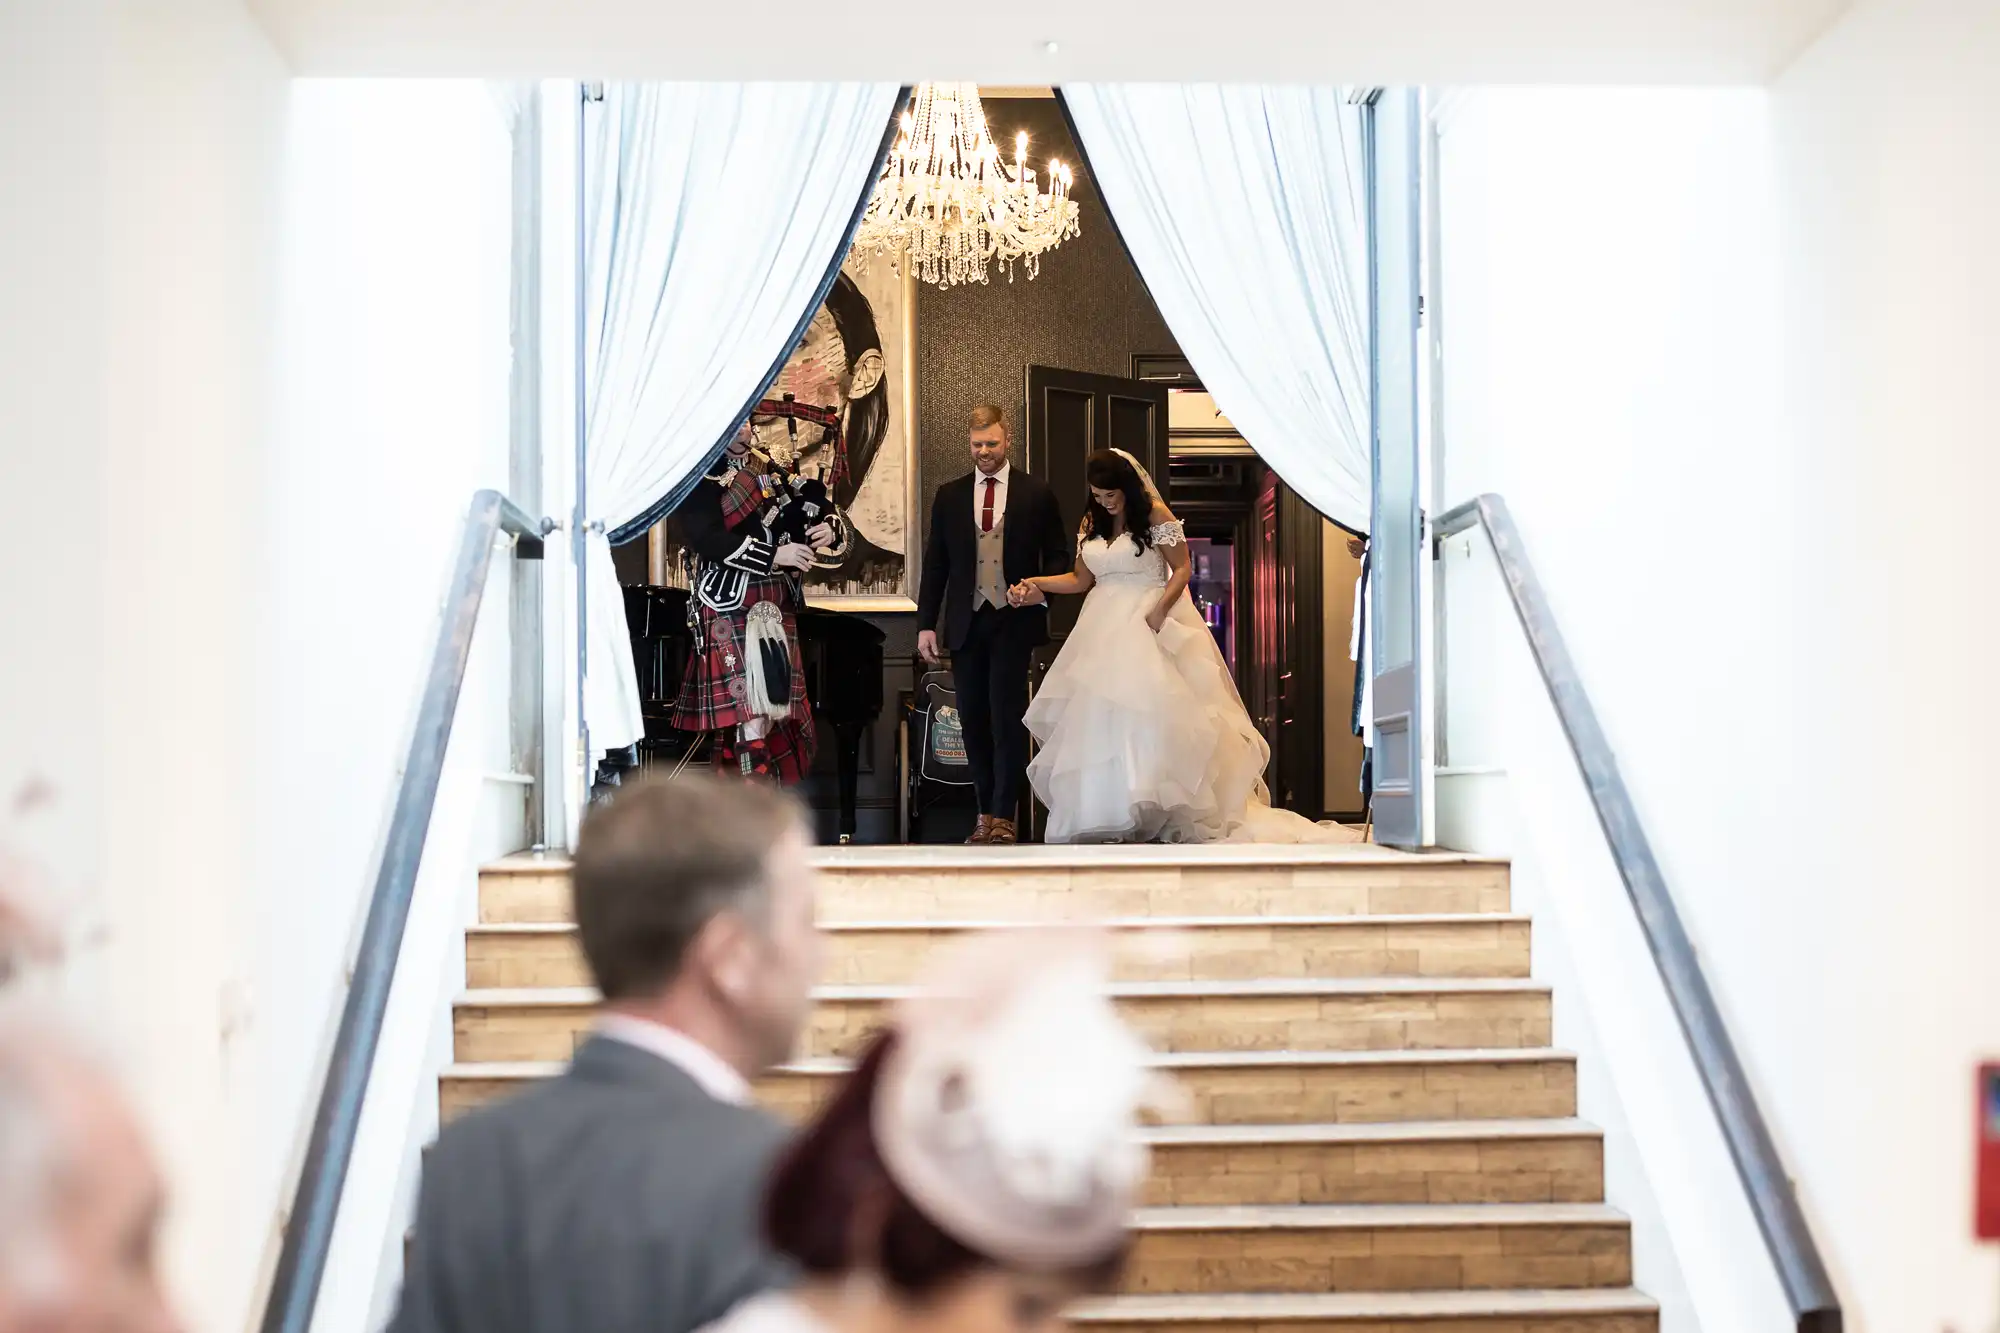 A bride in a white gown and a groom in a suit walk down steps, holding hands, with a chandelier and draped curtains in the background. Guests watch them descend.